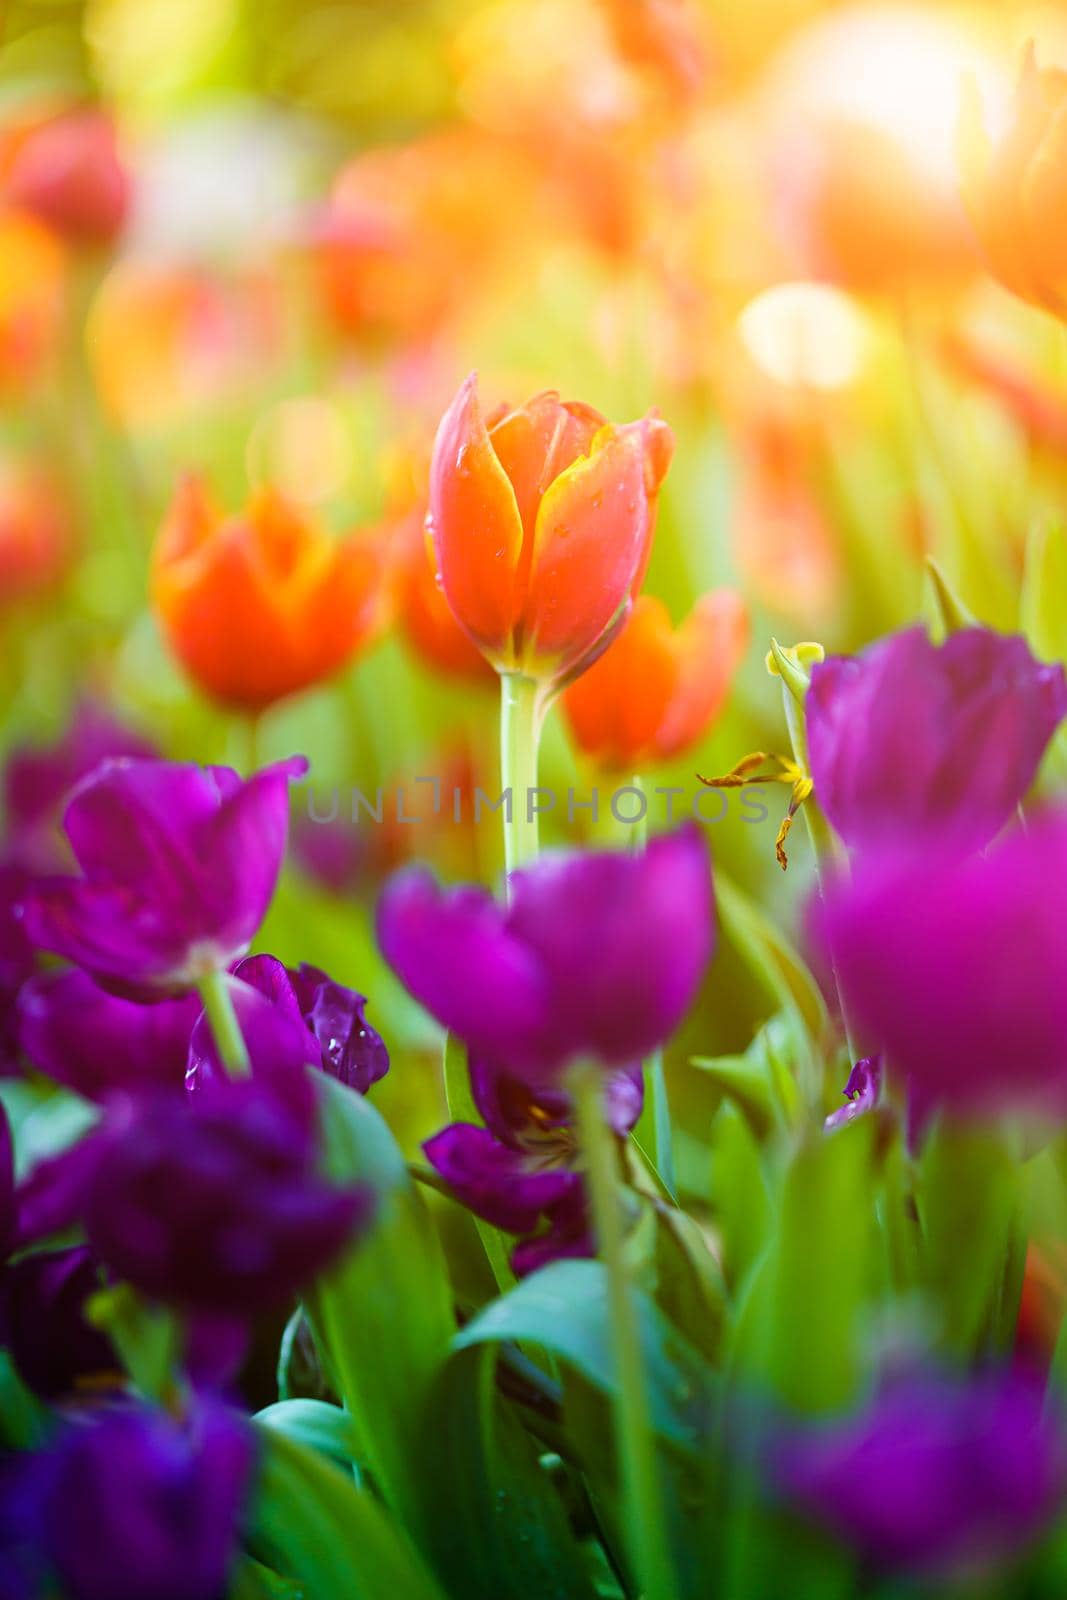 Red tulips in the garden by stoonn